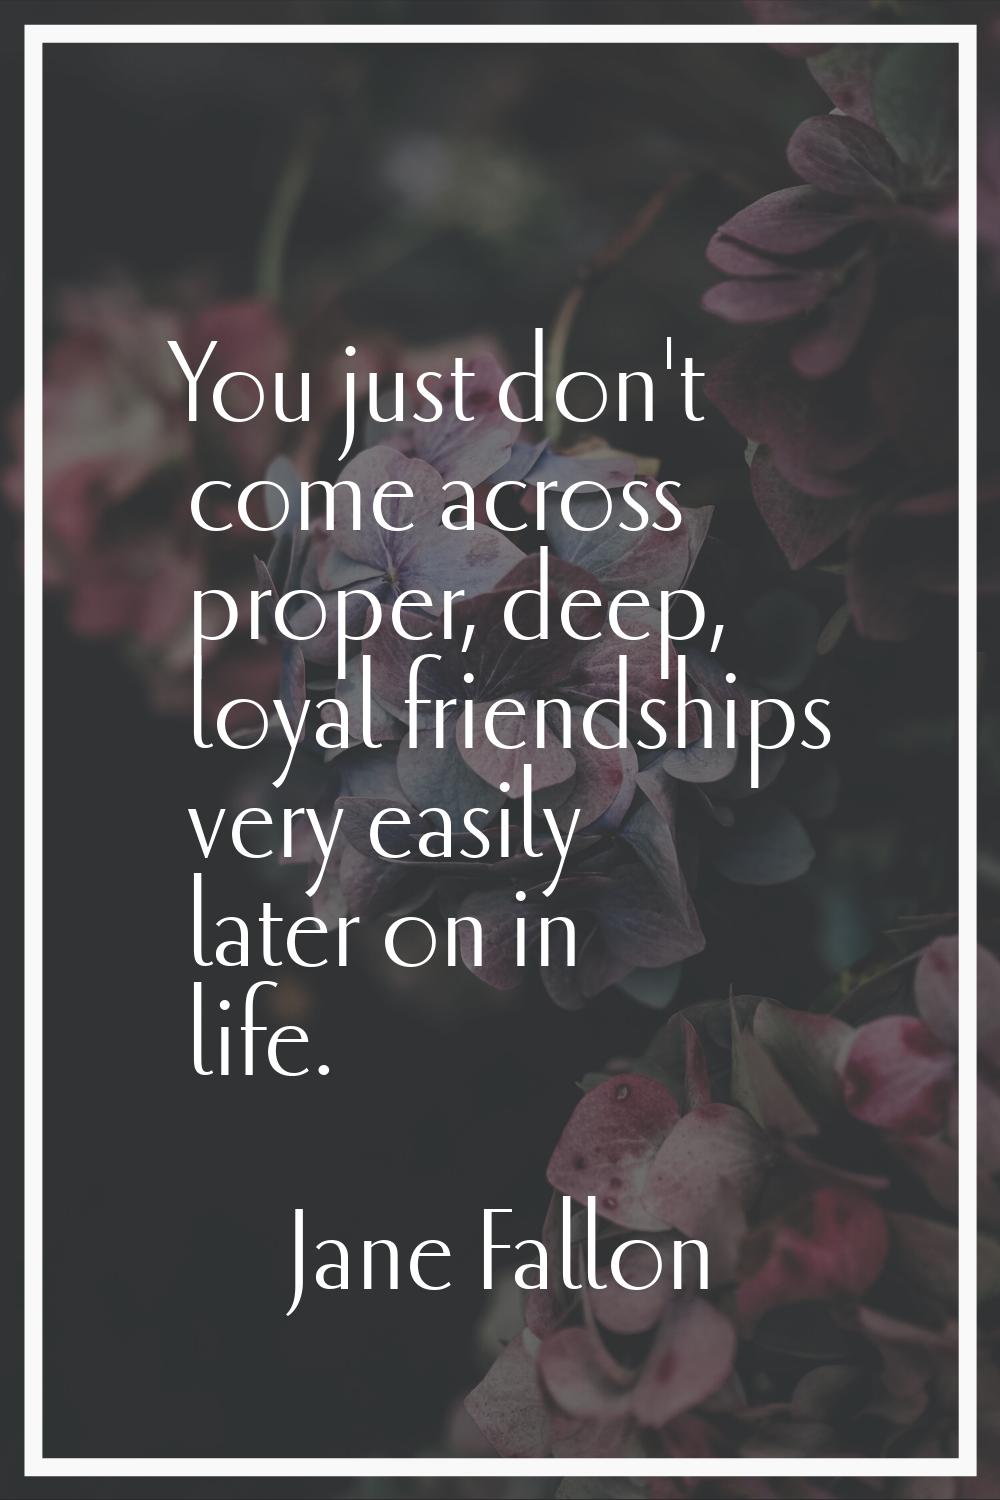 You just don't come across proper, deep, loyal friendships very easily later on in life.